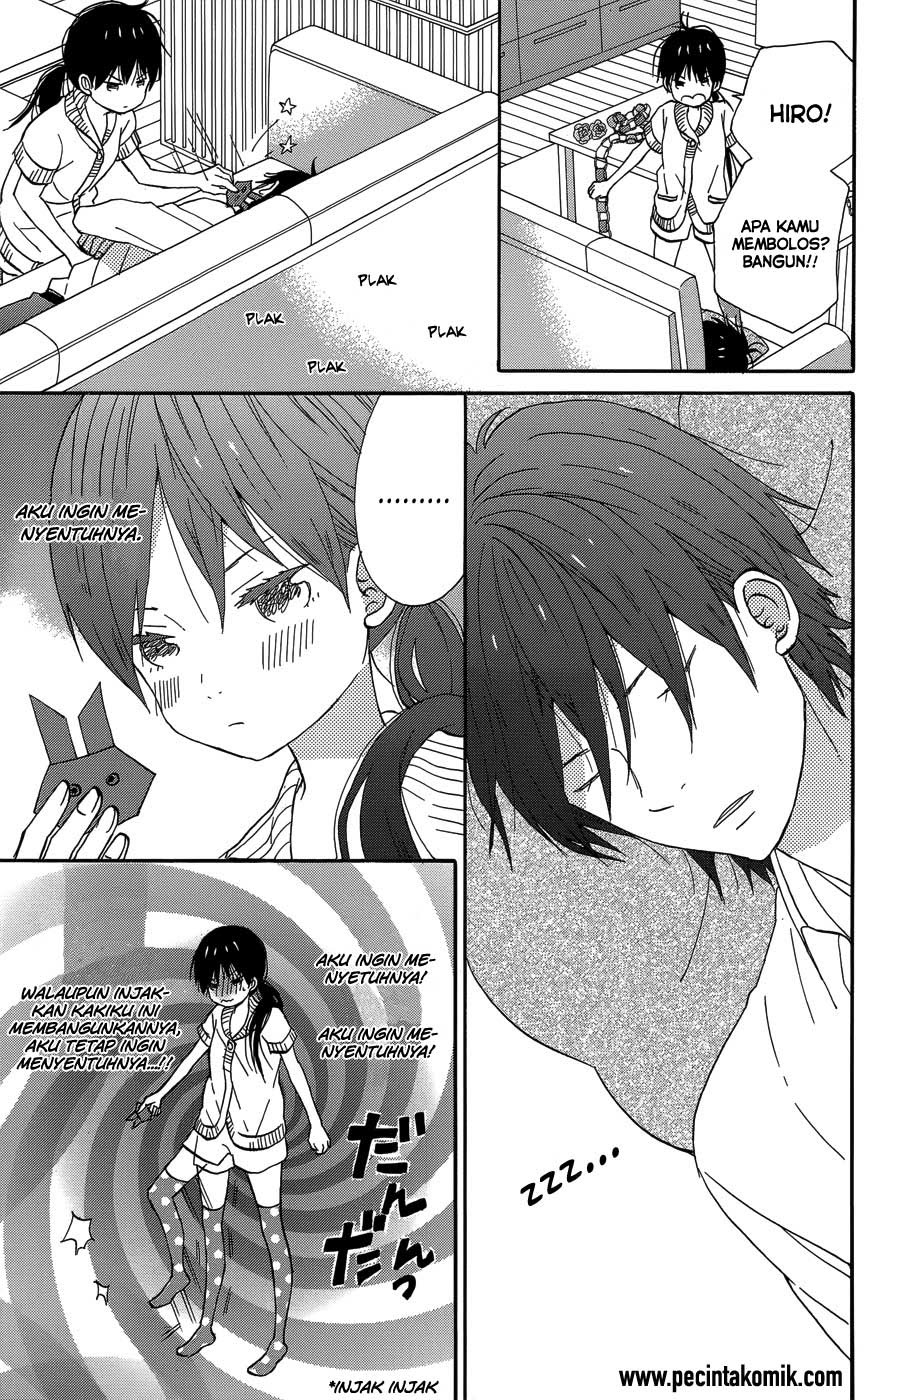 Taiyou no Ie Chapter 19